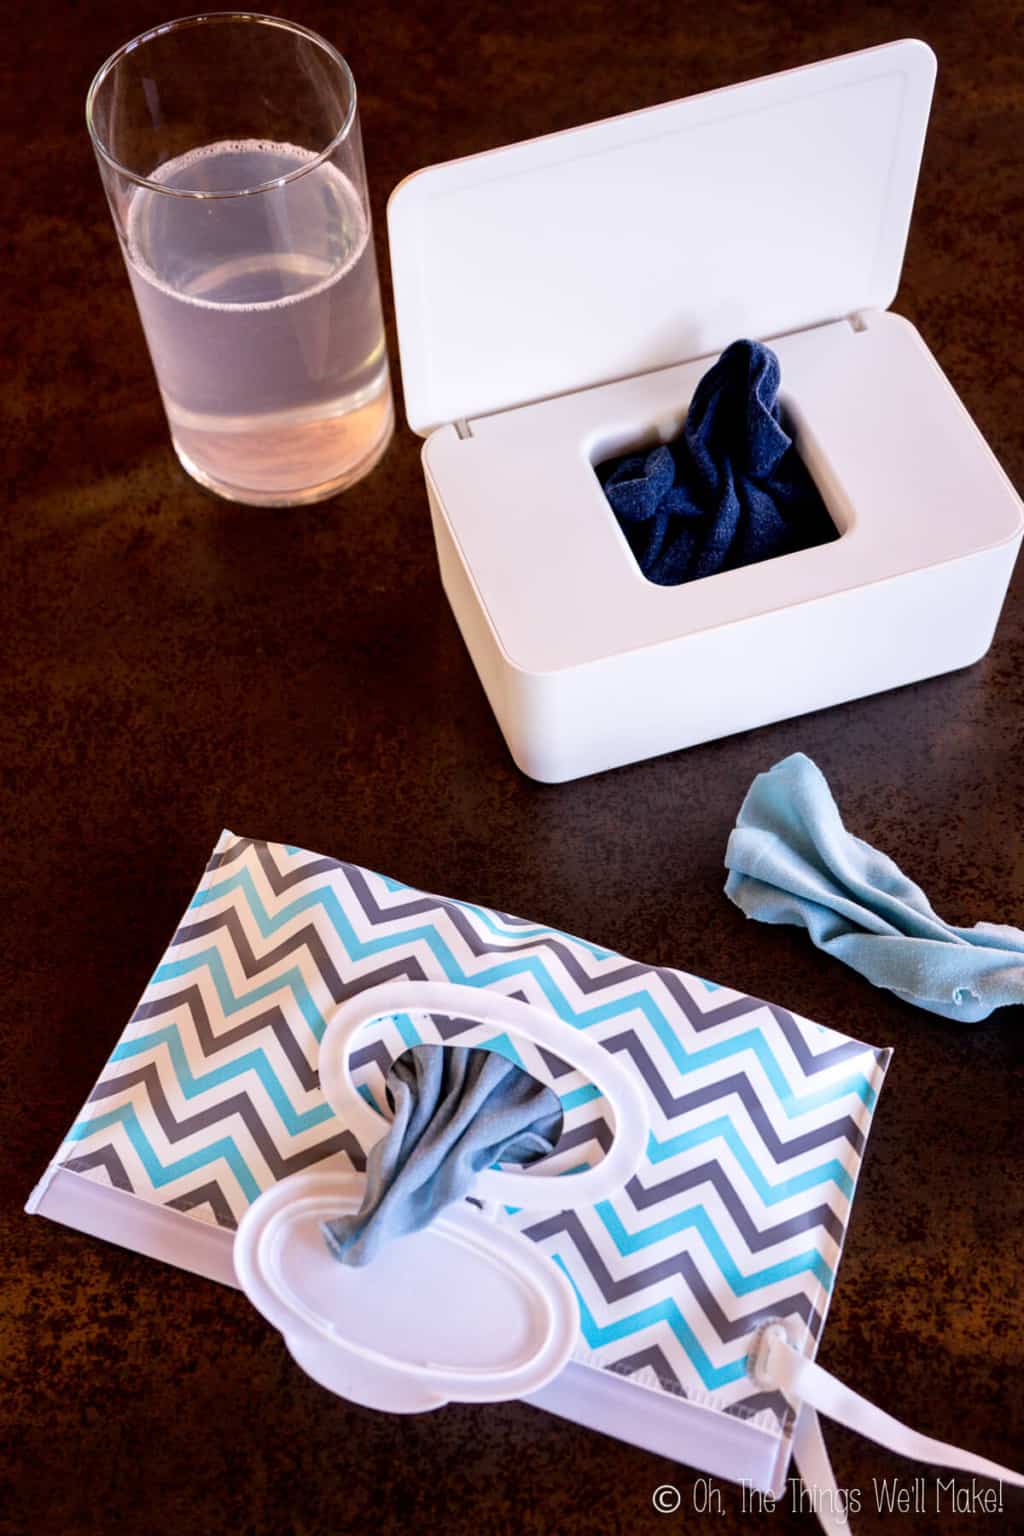 Two different wipes containers filled with homemade cloth wipes. Top container is white rectangular plastic dispenser and bottom is a chevron patterned plastic bag dispenser.